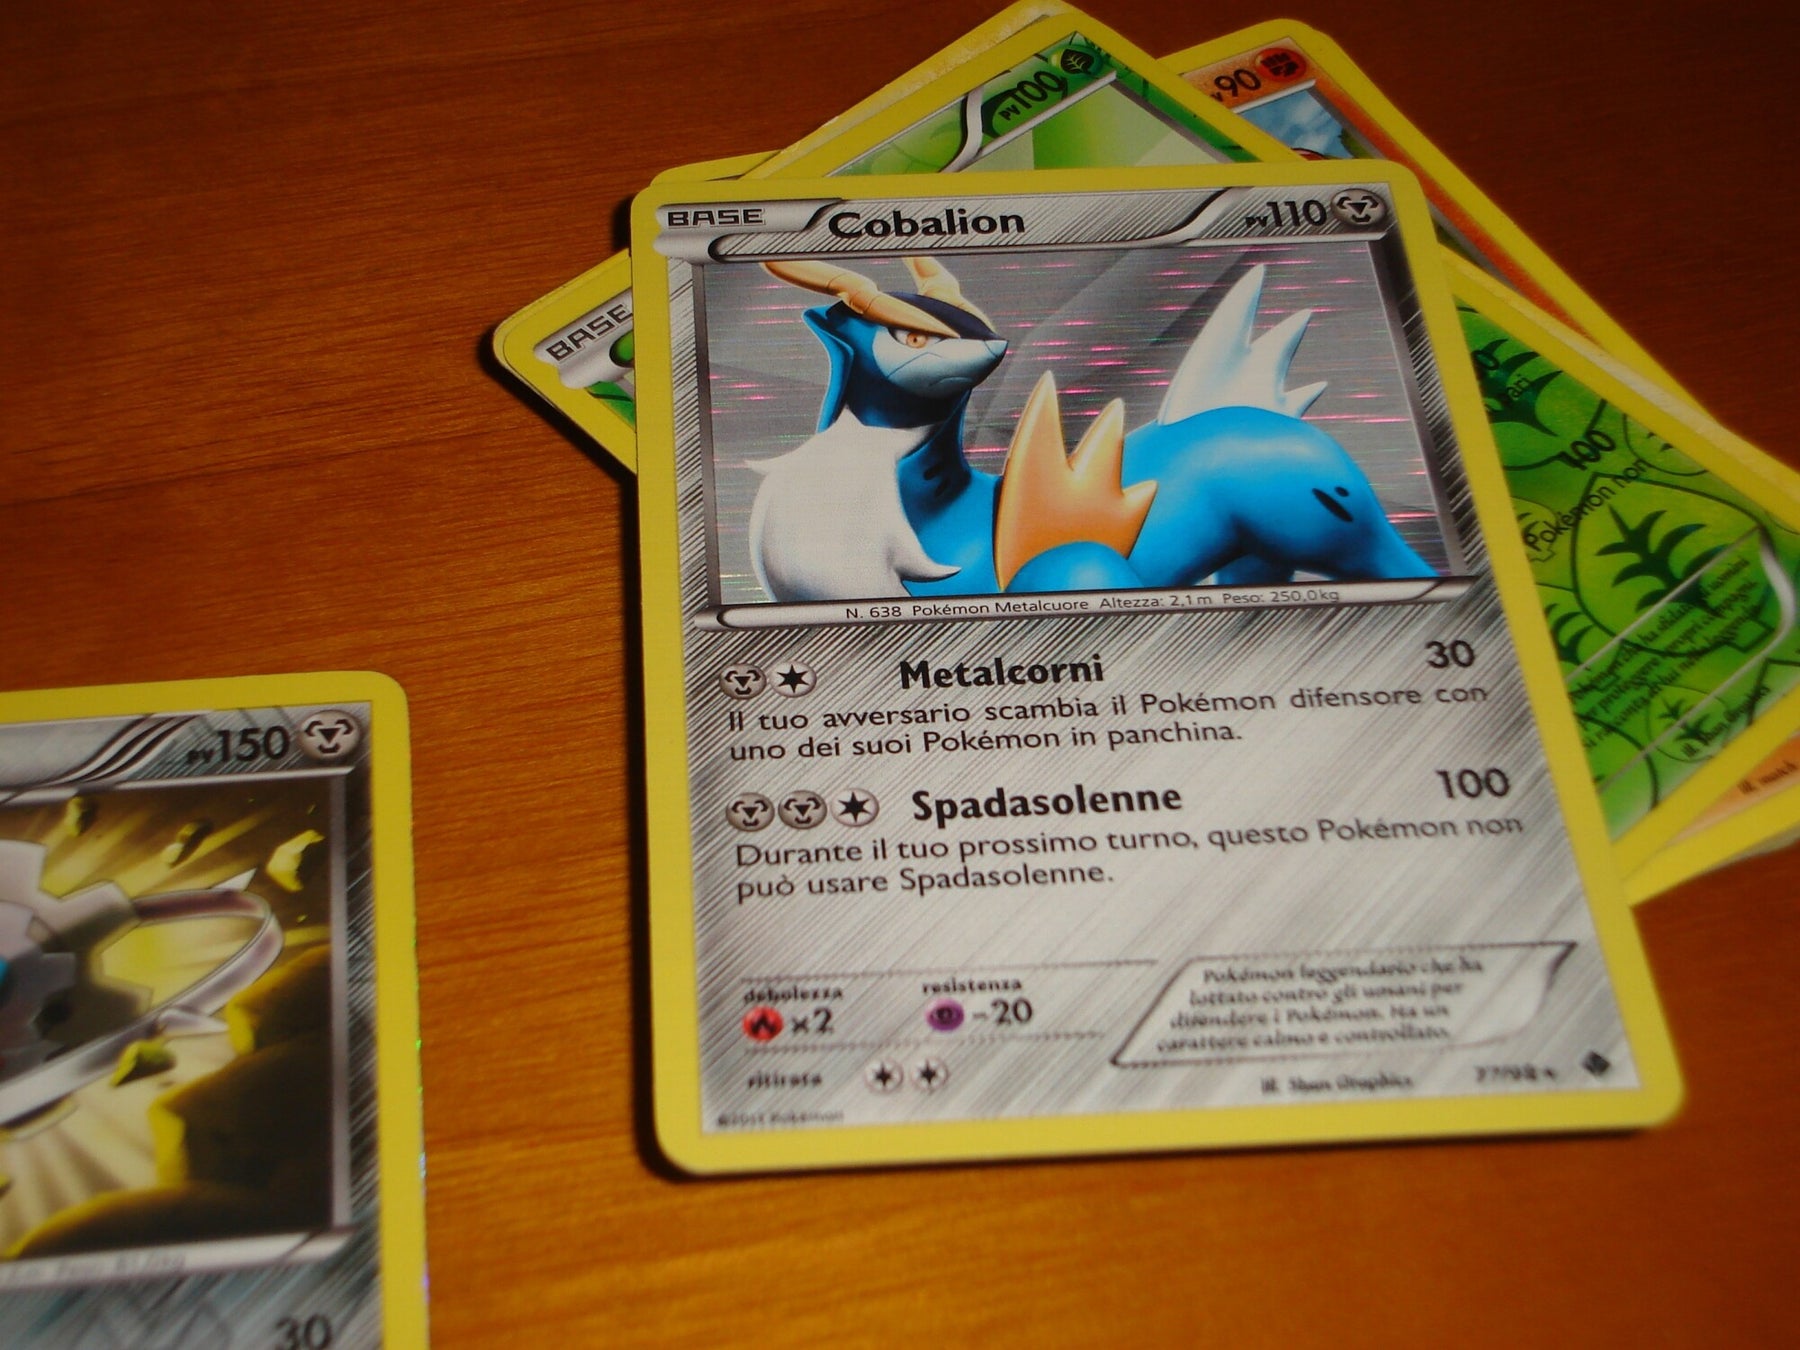 8 Expert Tips for Collecting Pokémon Cards